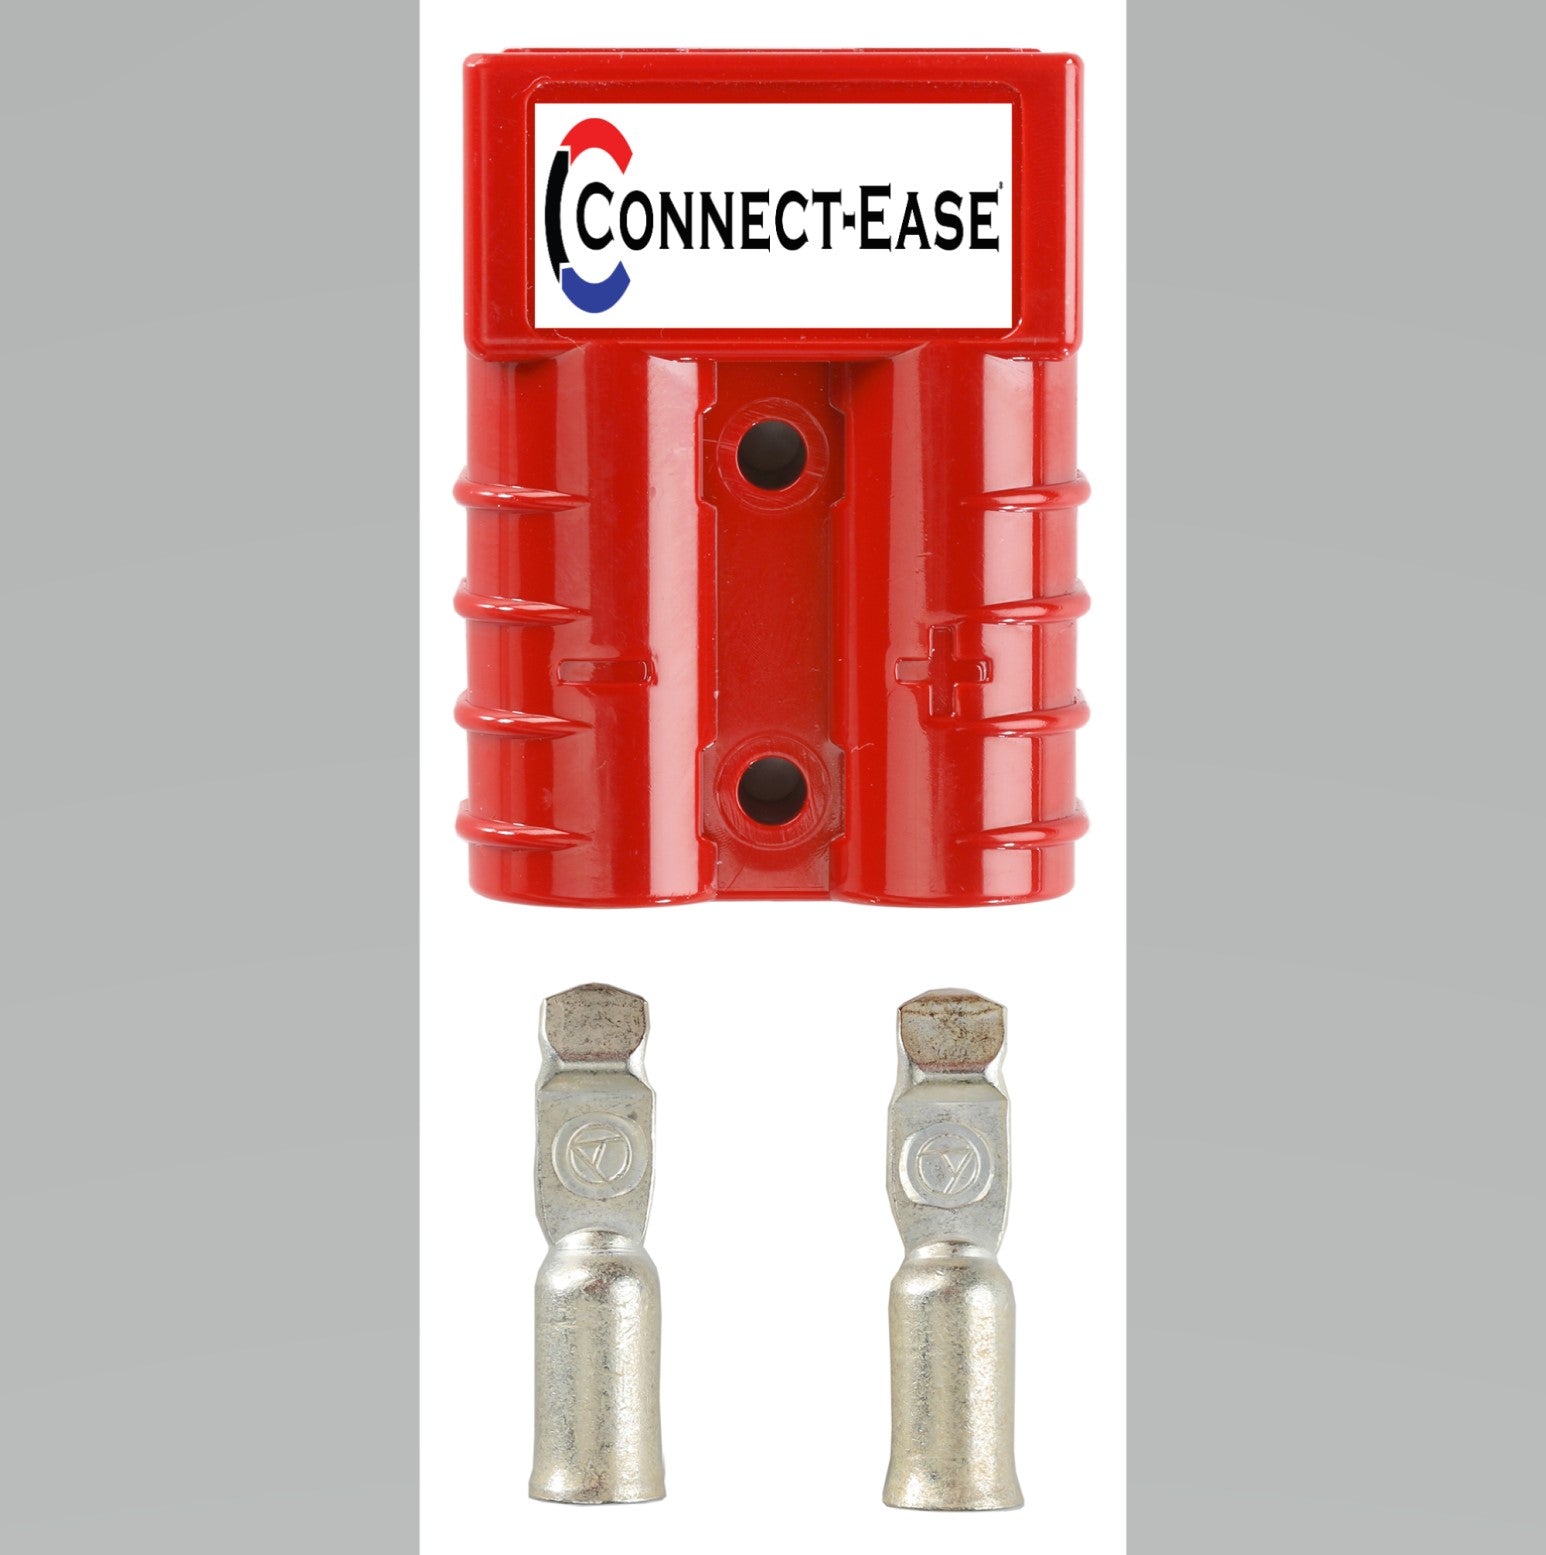 Red Connector (120 Amp): 110-12-14-16 Gauge Wire (CE50-10) - Connect-Ease. Connect all your marine equipment with ease.